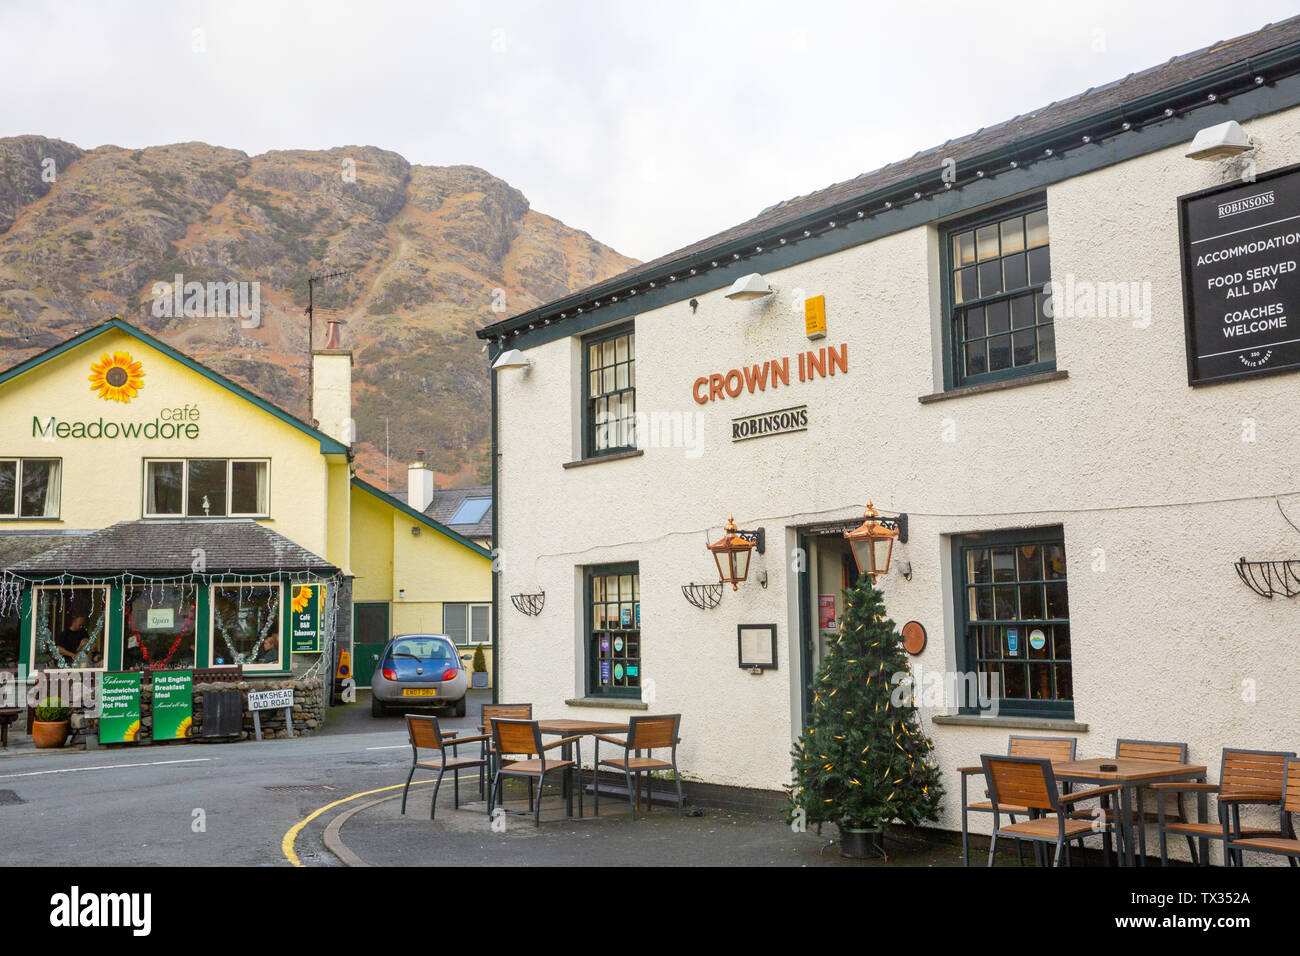 Village of Coniston in the Lake District on a winters day with Crown Inn public house and local cafe restaurant, Coniston,England Stock Photo